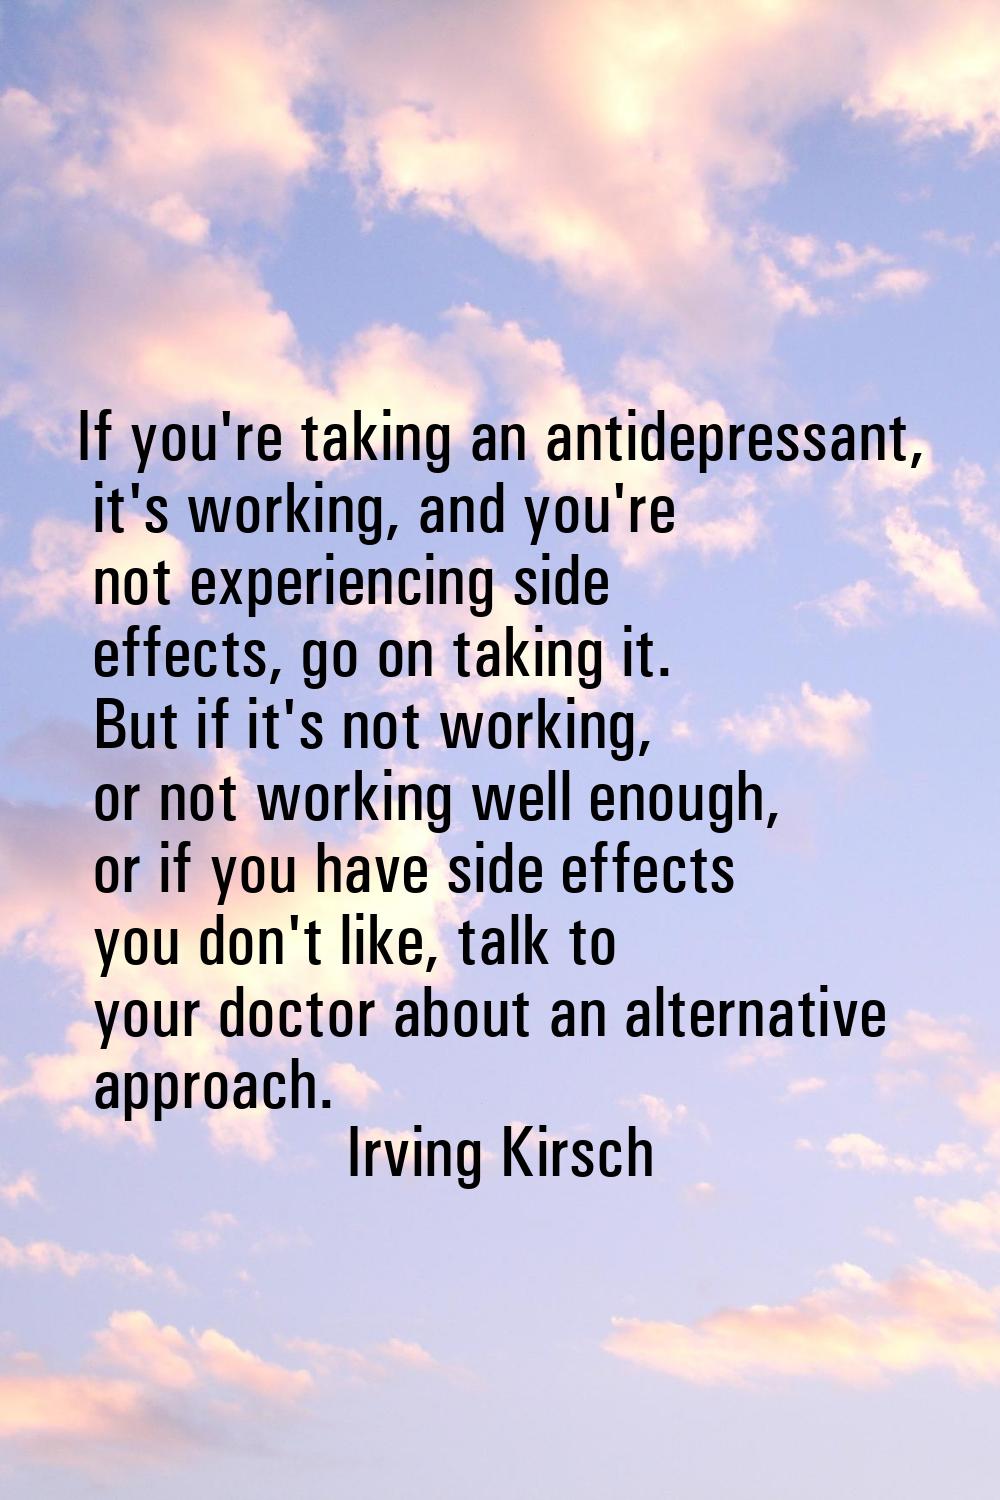 If you're taking an antidepressant, it's working, and you're not experiencing side effects, go on t